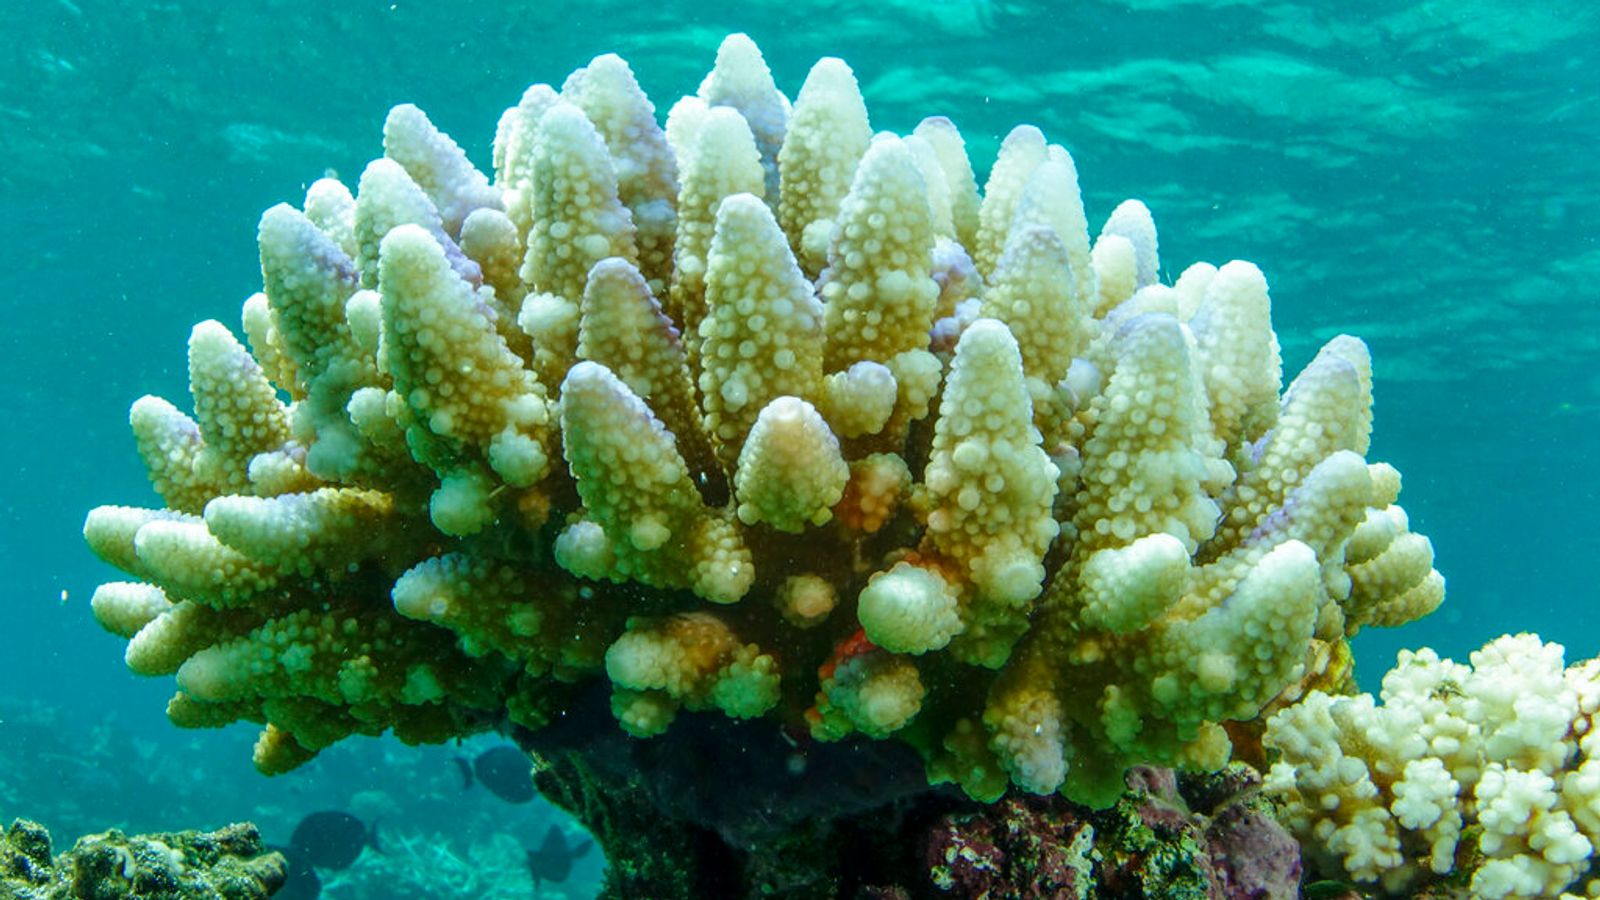 mass bleaching of coral reefs caused by climate change and warming oceans, scientists say